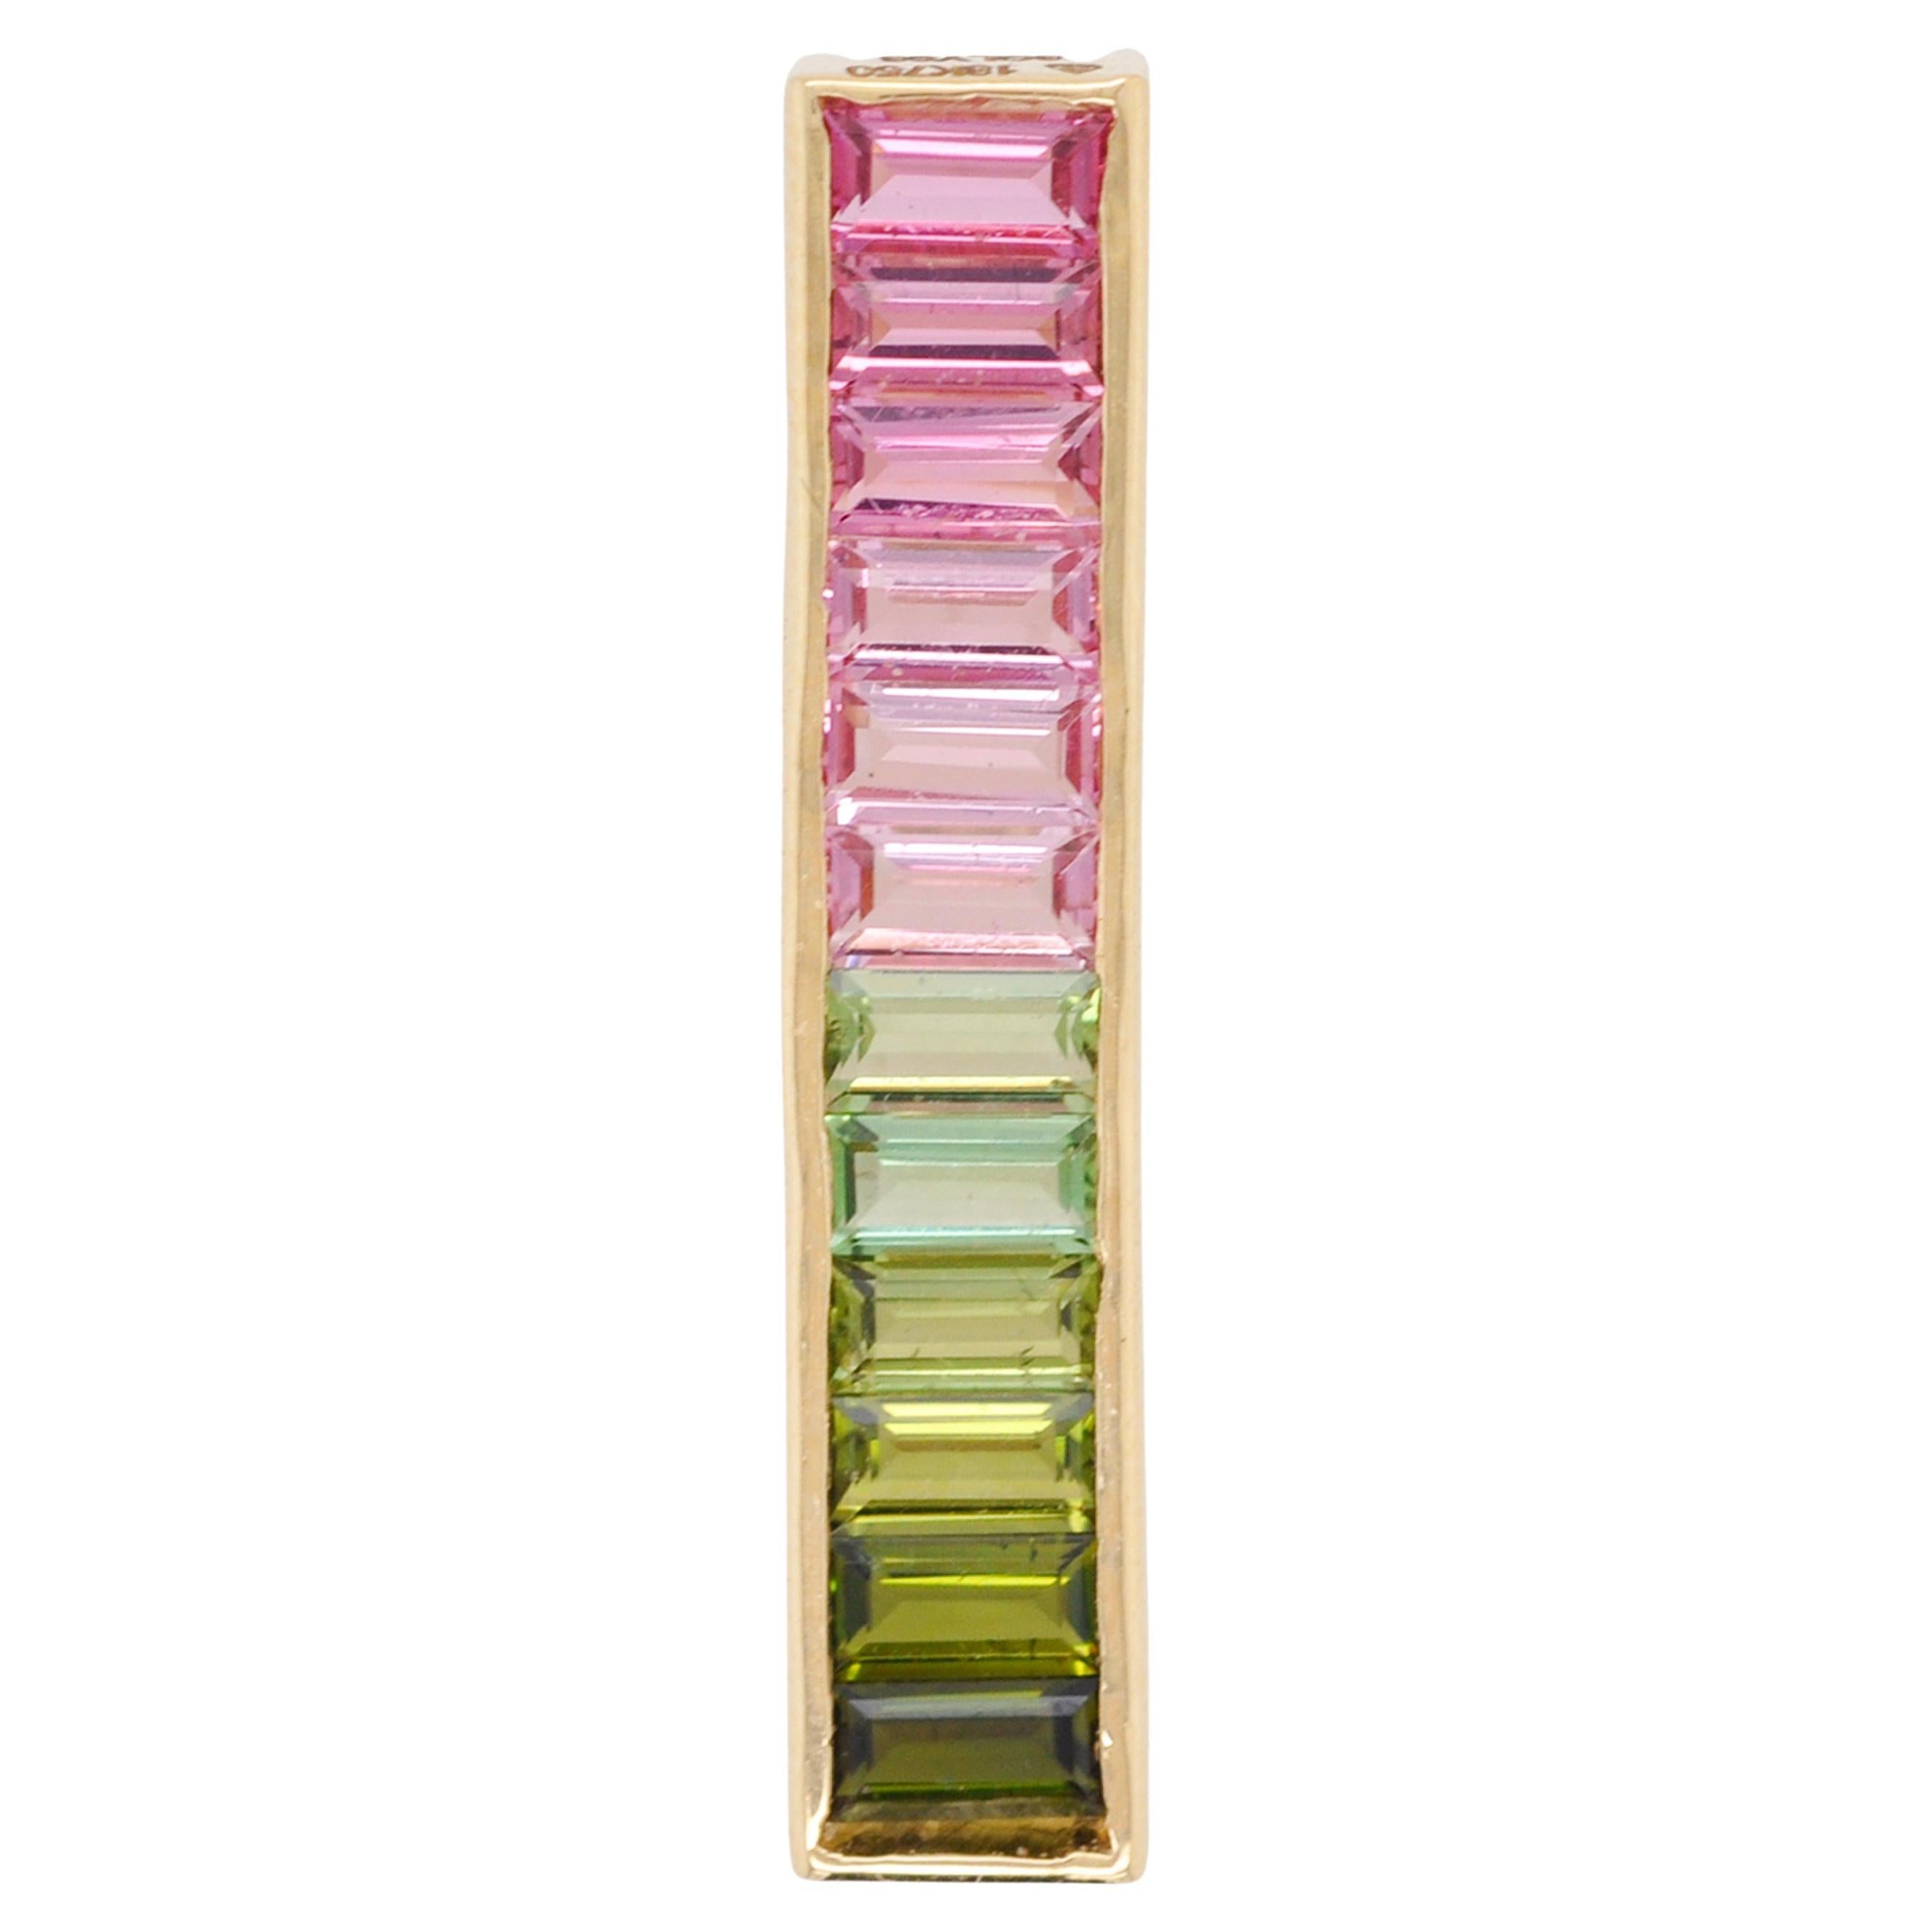 Is tourmaline used in jewelry?